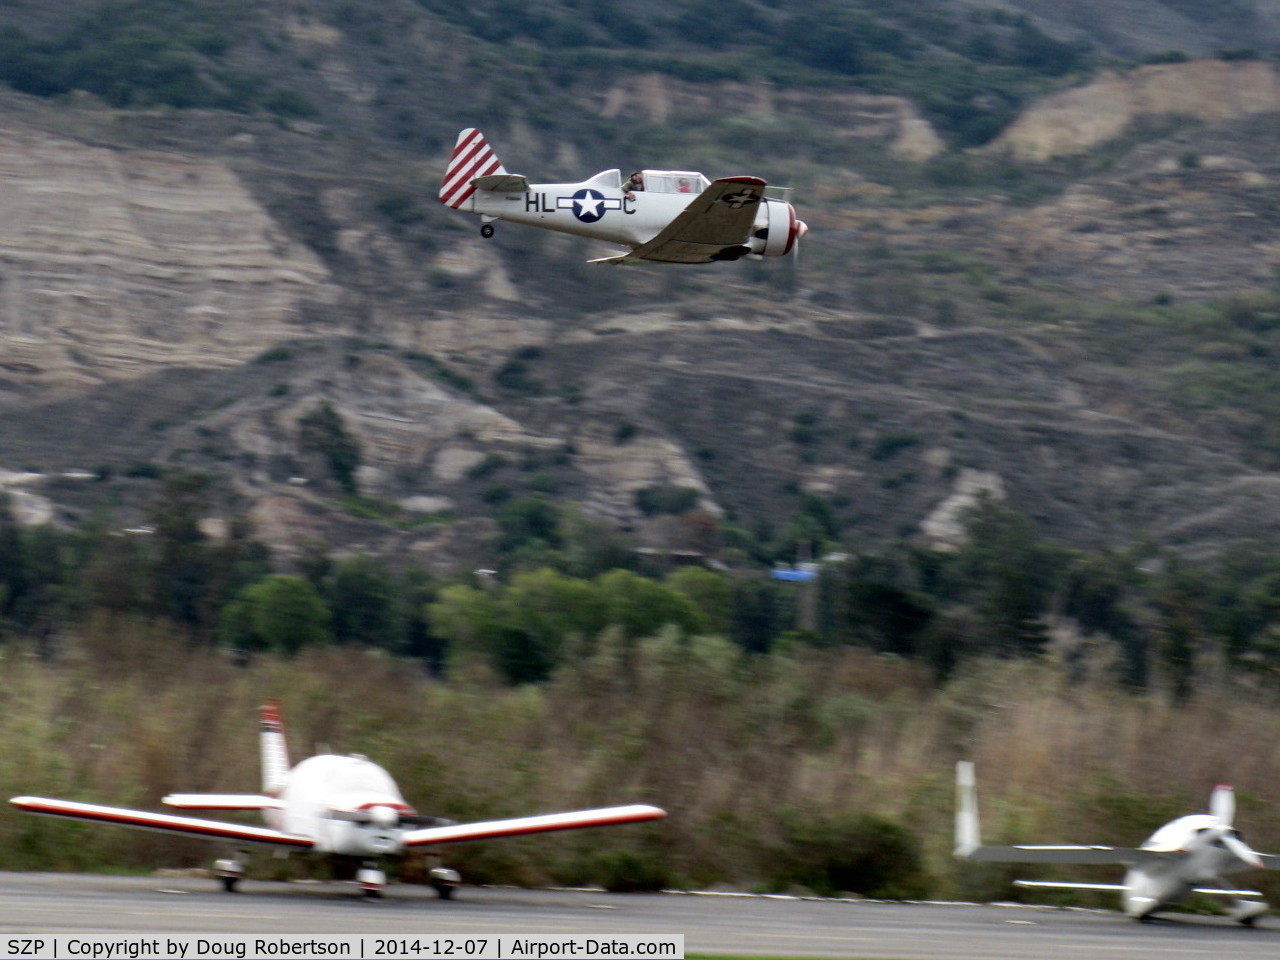 Santa Paula Airport (SZP) - Condor Squadron making another high speed pass flour bombing the riverbed target Commemorating the 7 Dec. 1941 attack on Pearl Harbor.